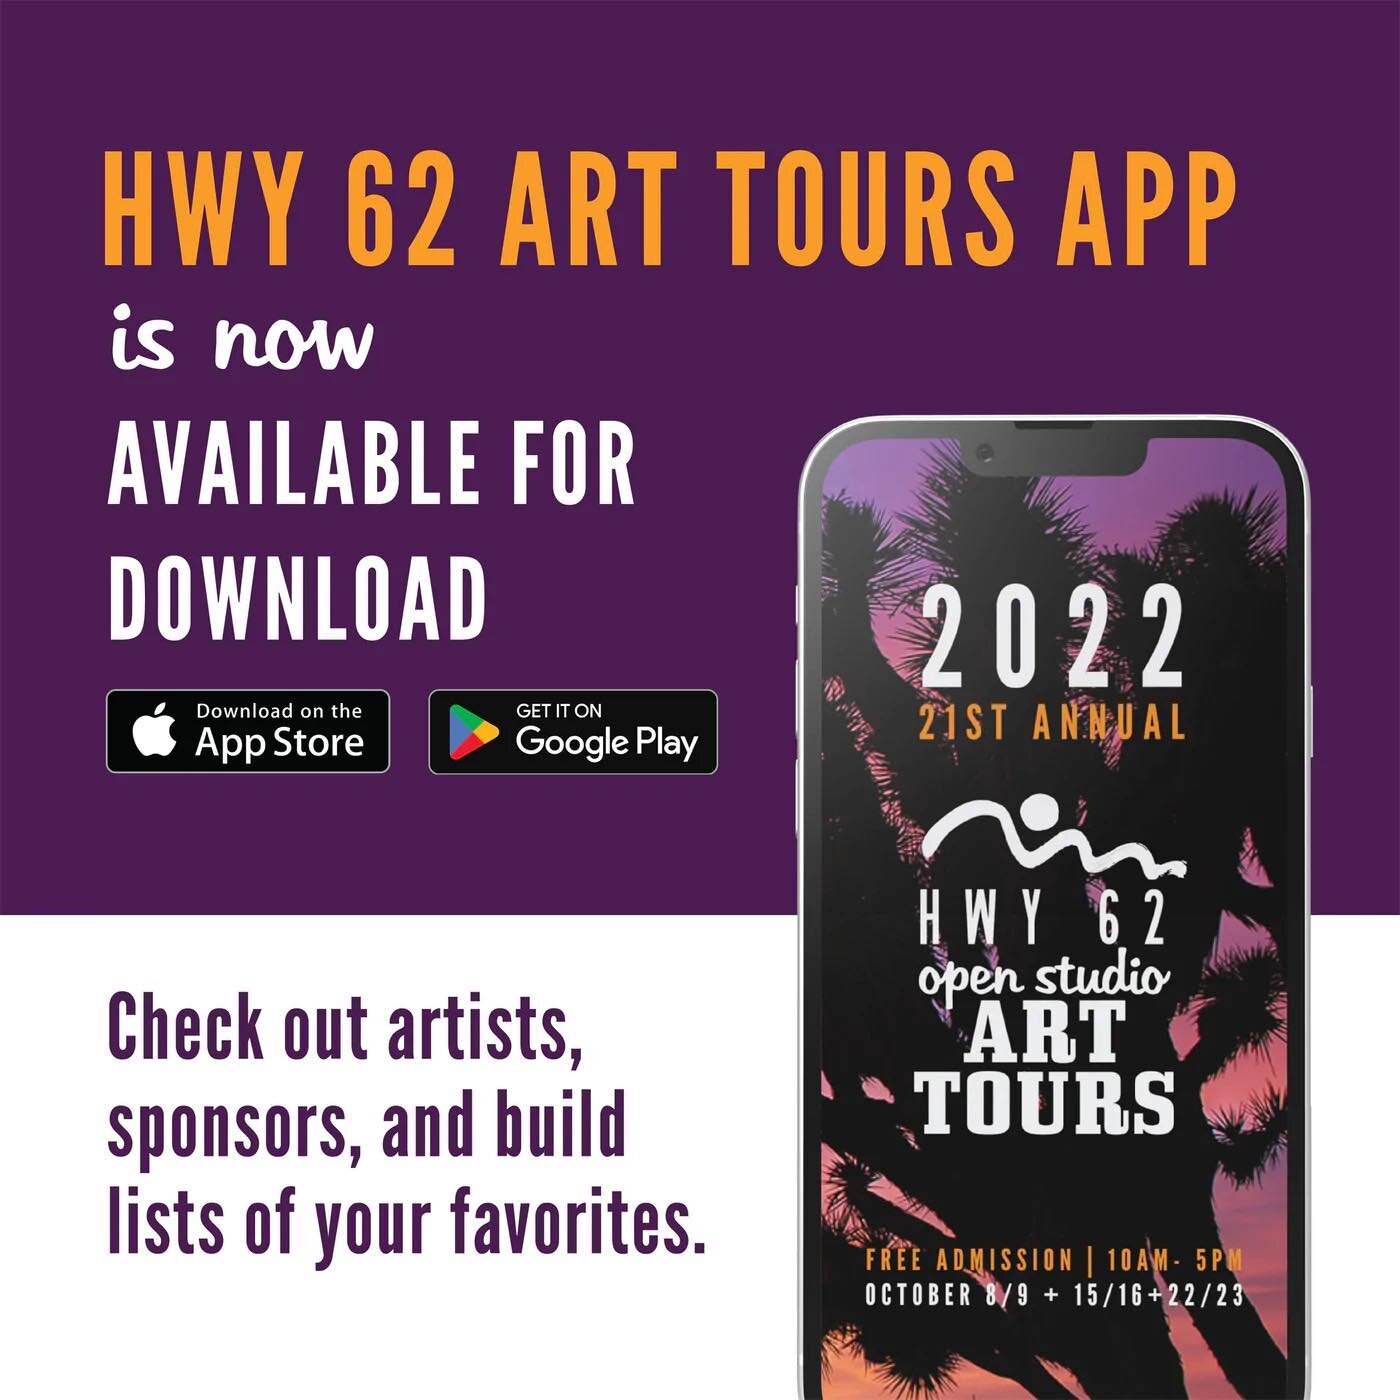 Book direct and stay with JTVH during the Hwy 62 Open Studio Art Tours!  Click bio for link to reserve without booking fees! 

This year&rsquo;s annual event is held Saturday and Sundays October 8-9, 15-16 and 22-23, with studios open from 10:00 am -